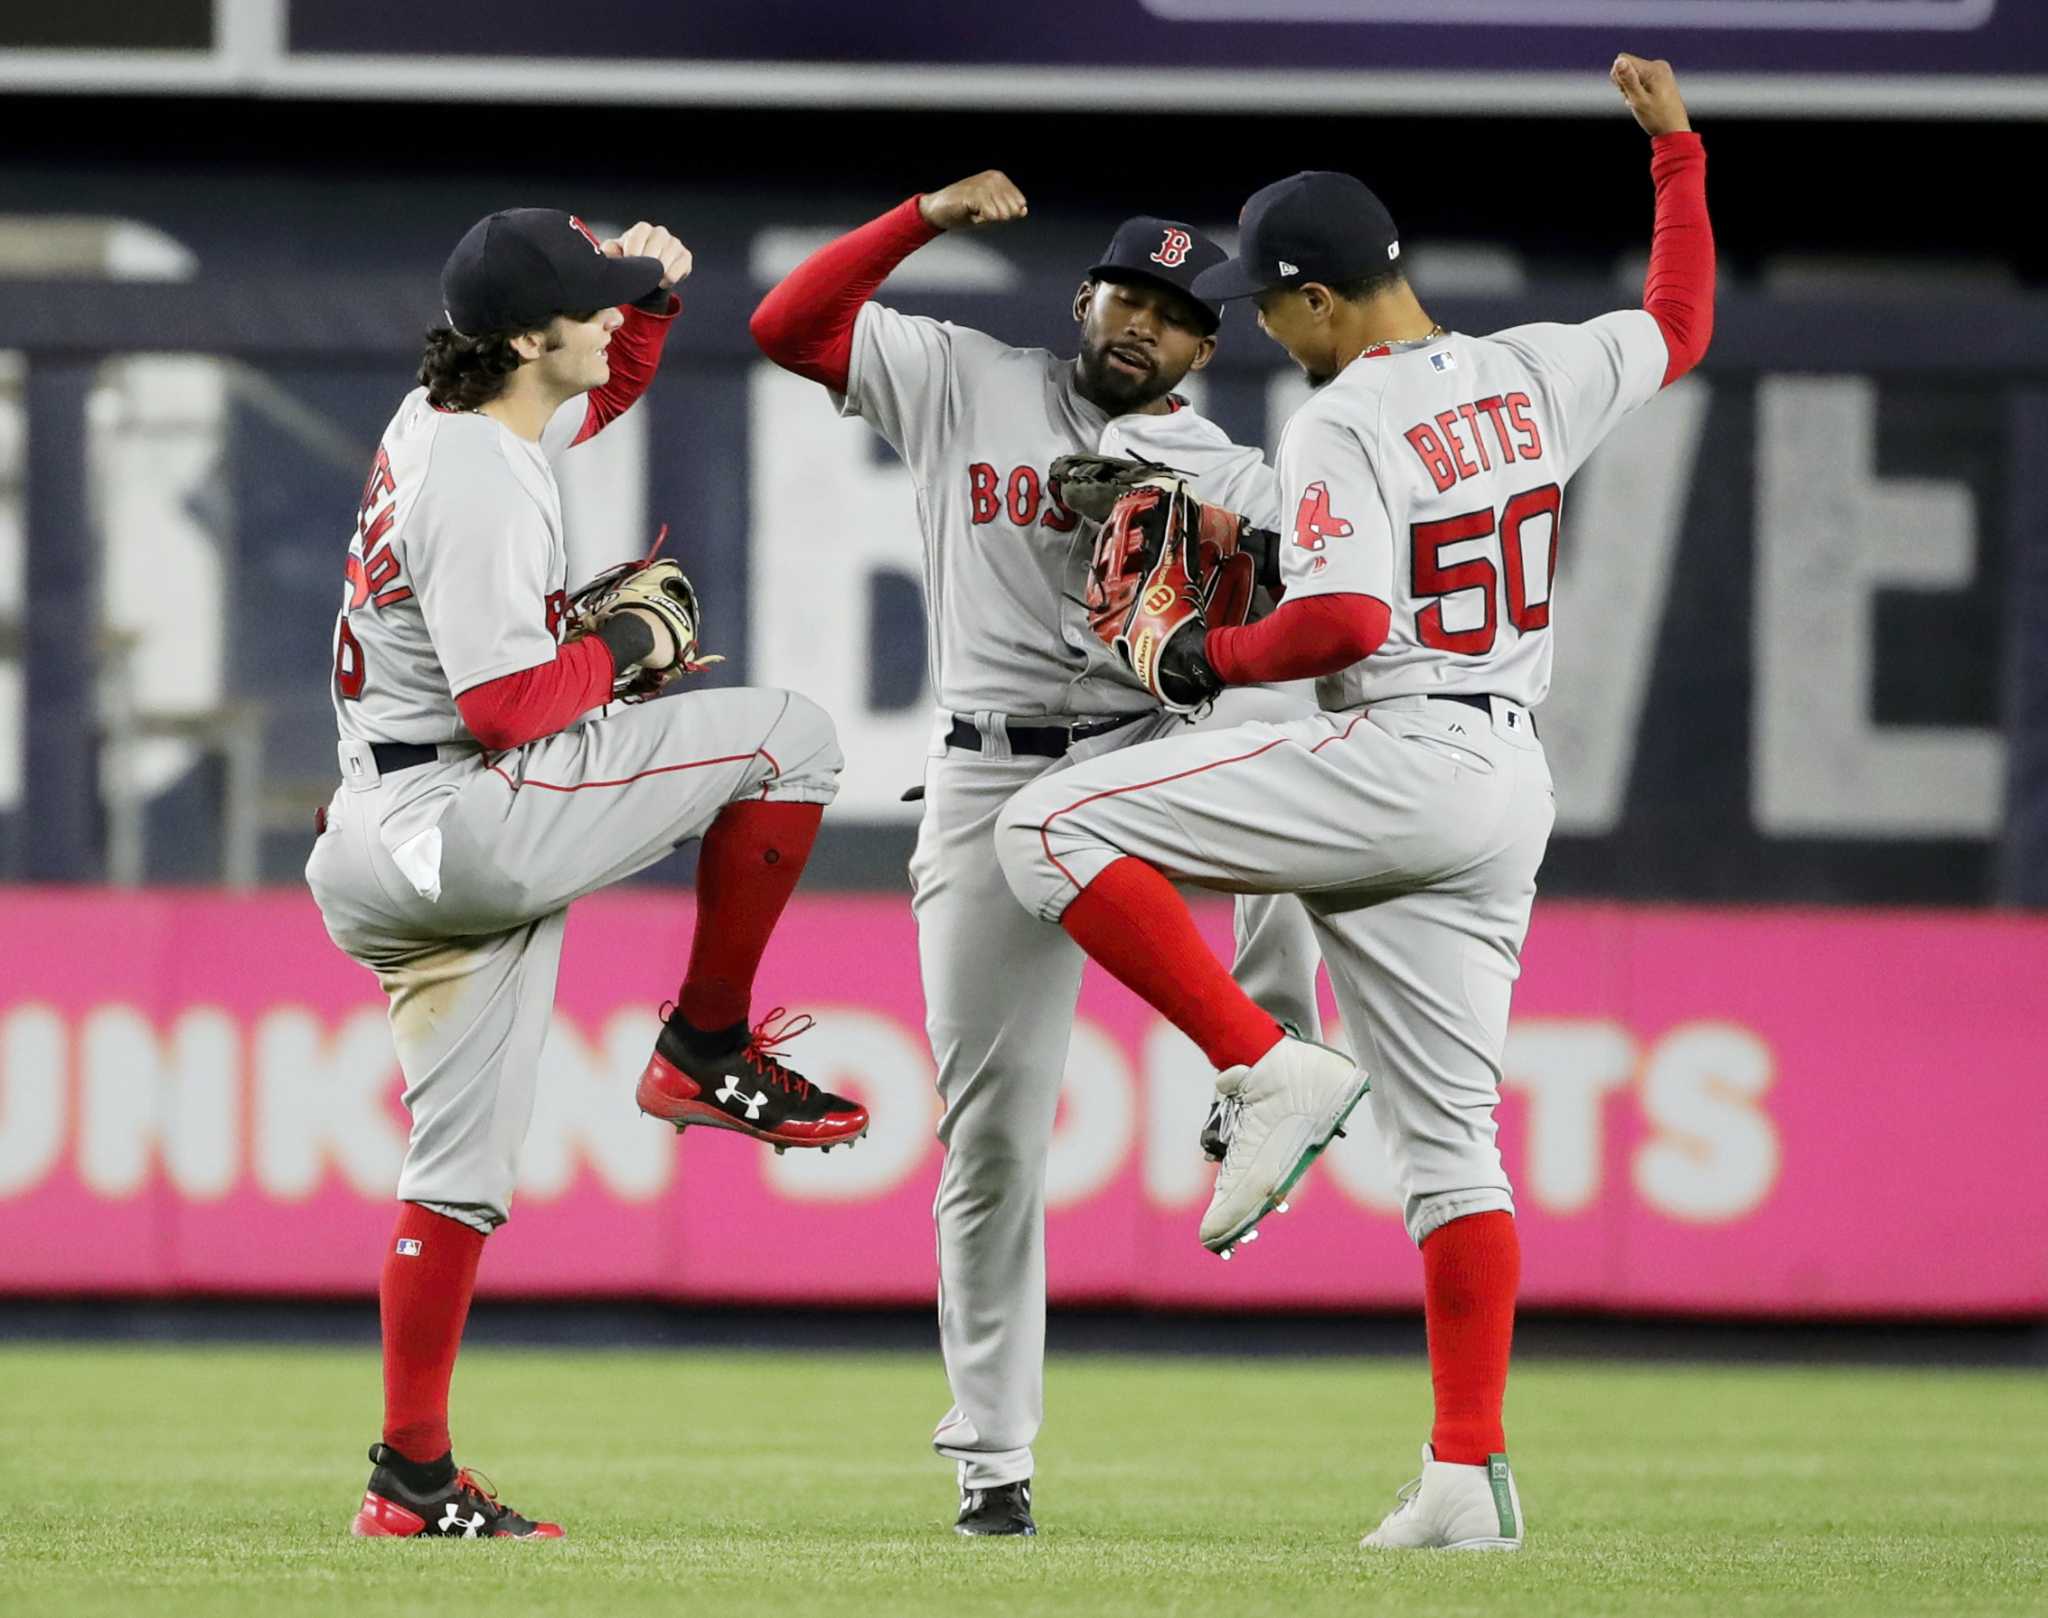 Hanley Ramirez homers to power Red Sox over Yankees again